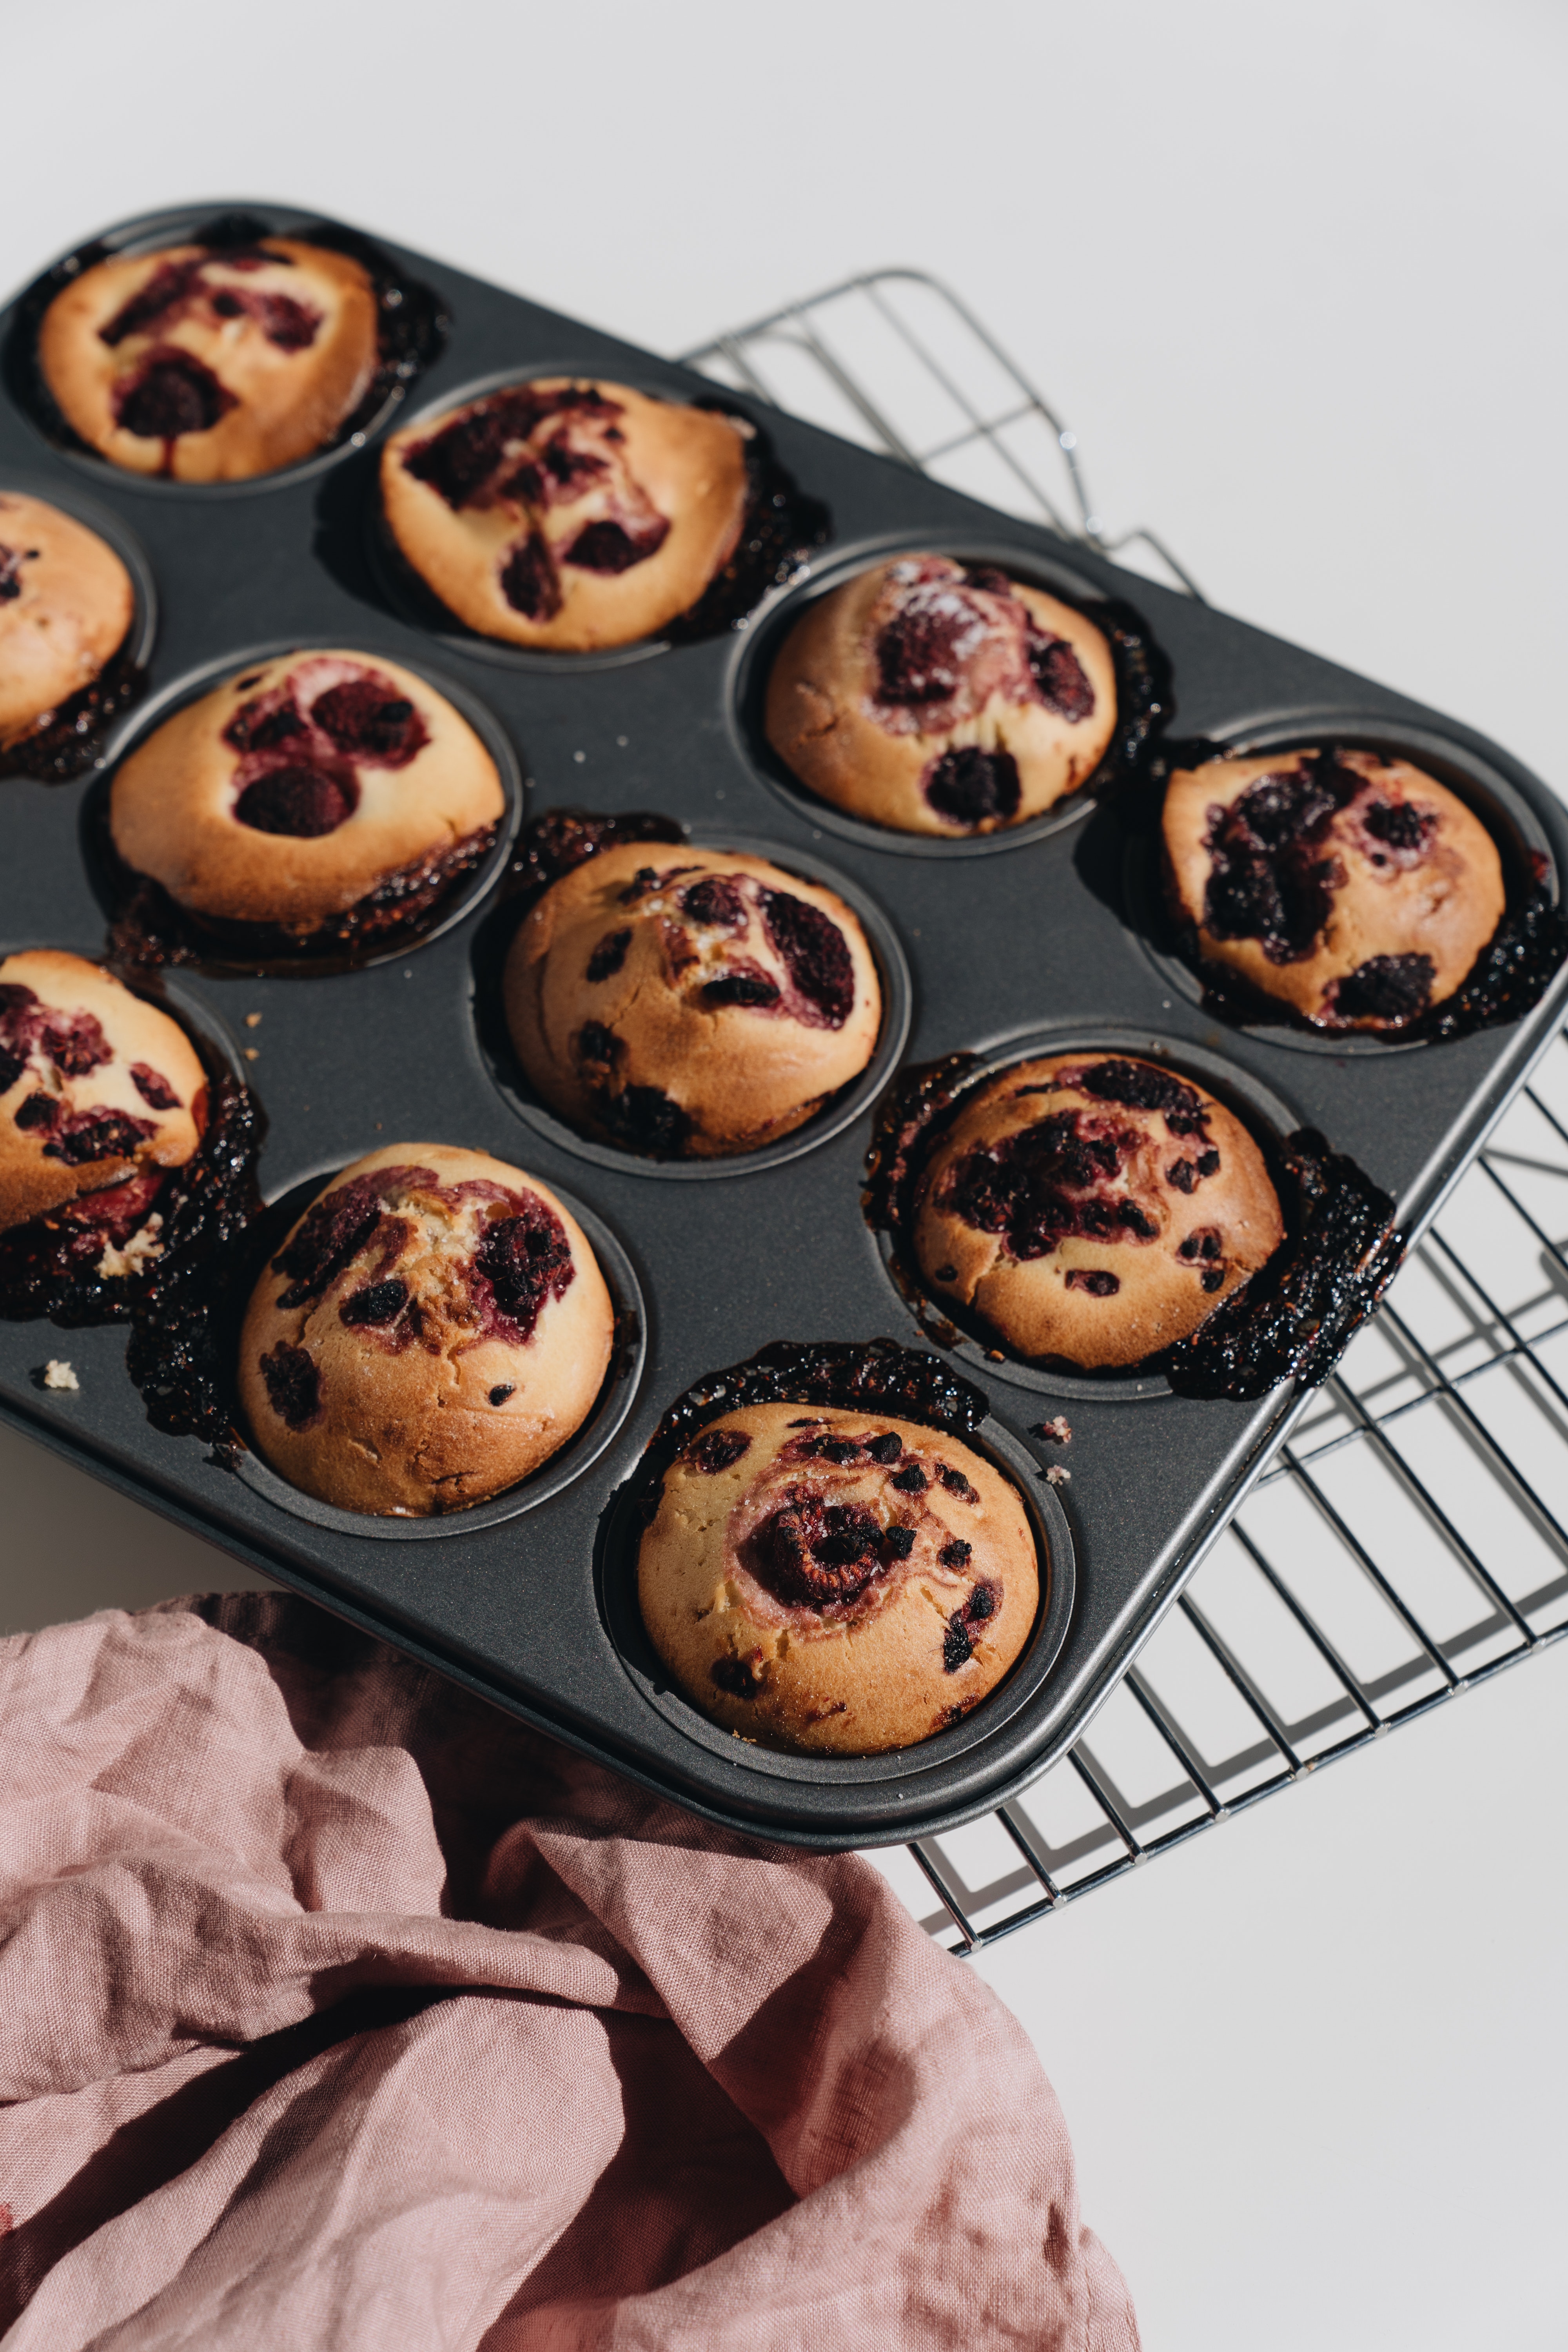 photo of berry muffins on tray 4051603 v2